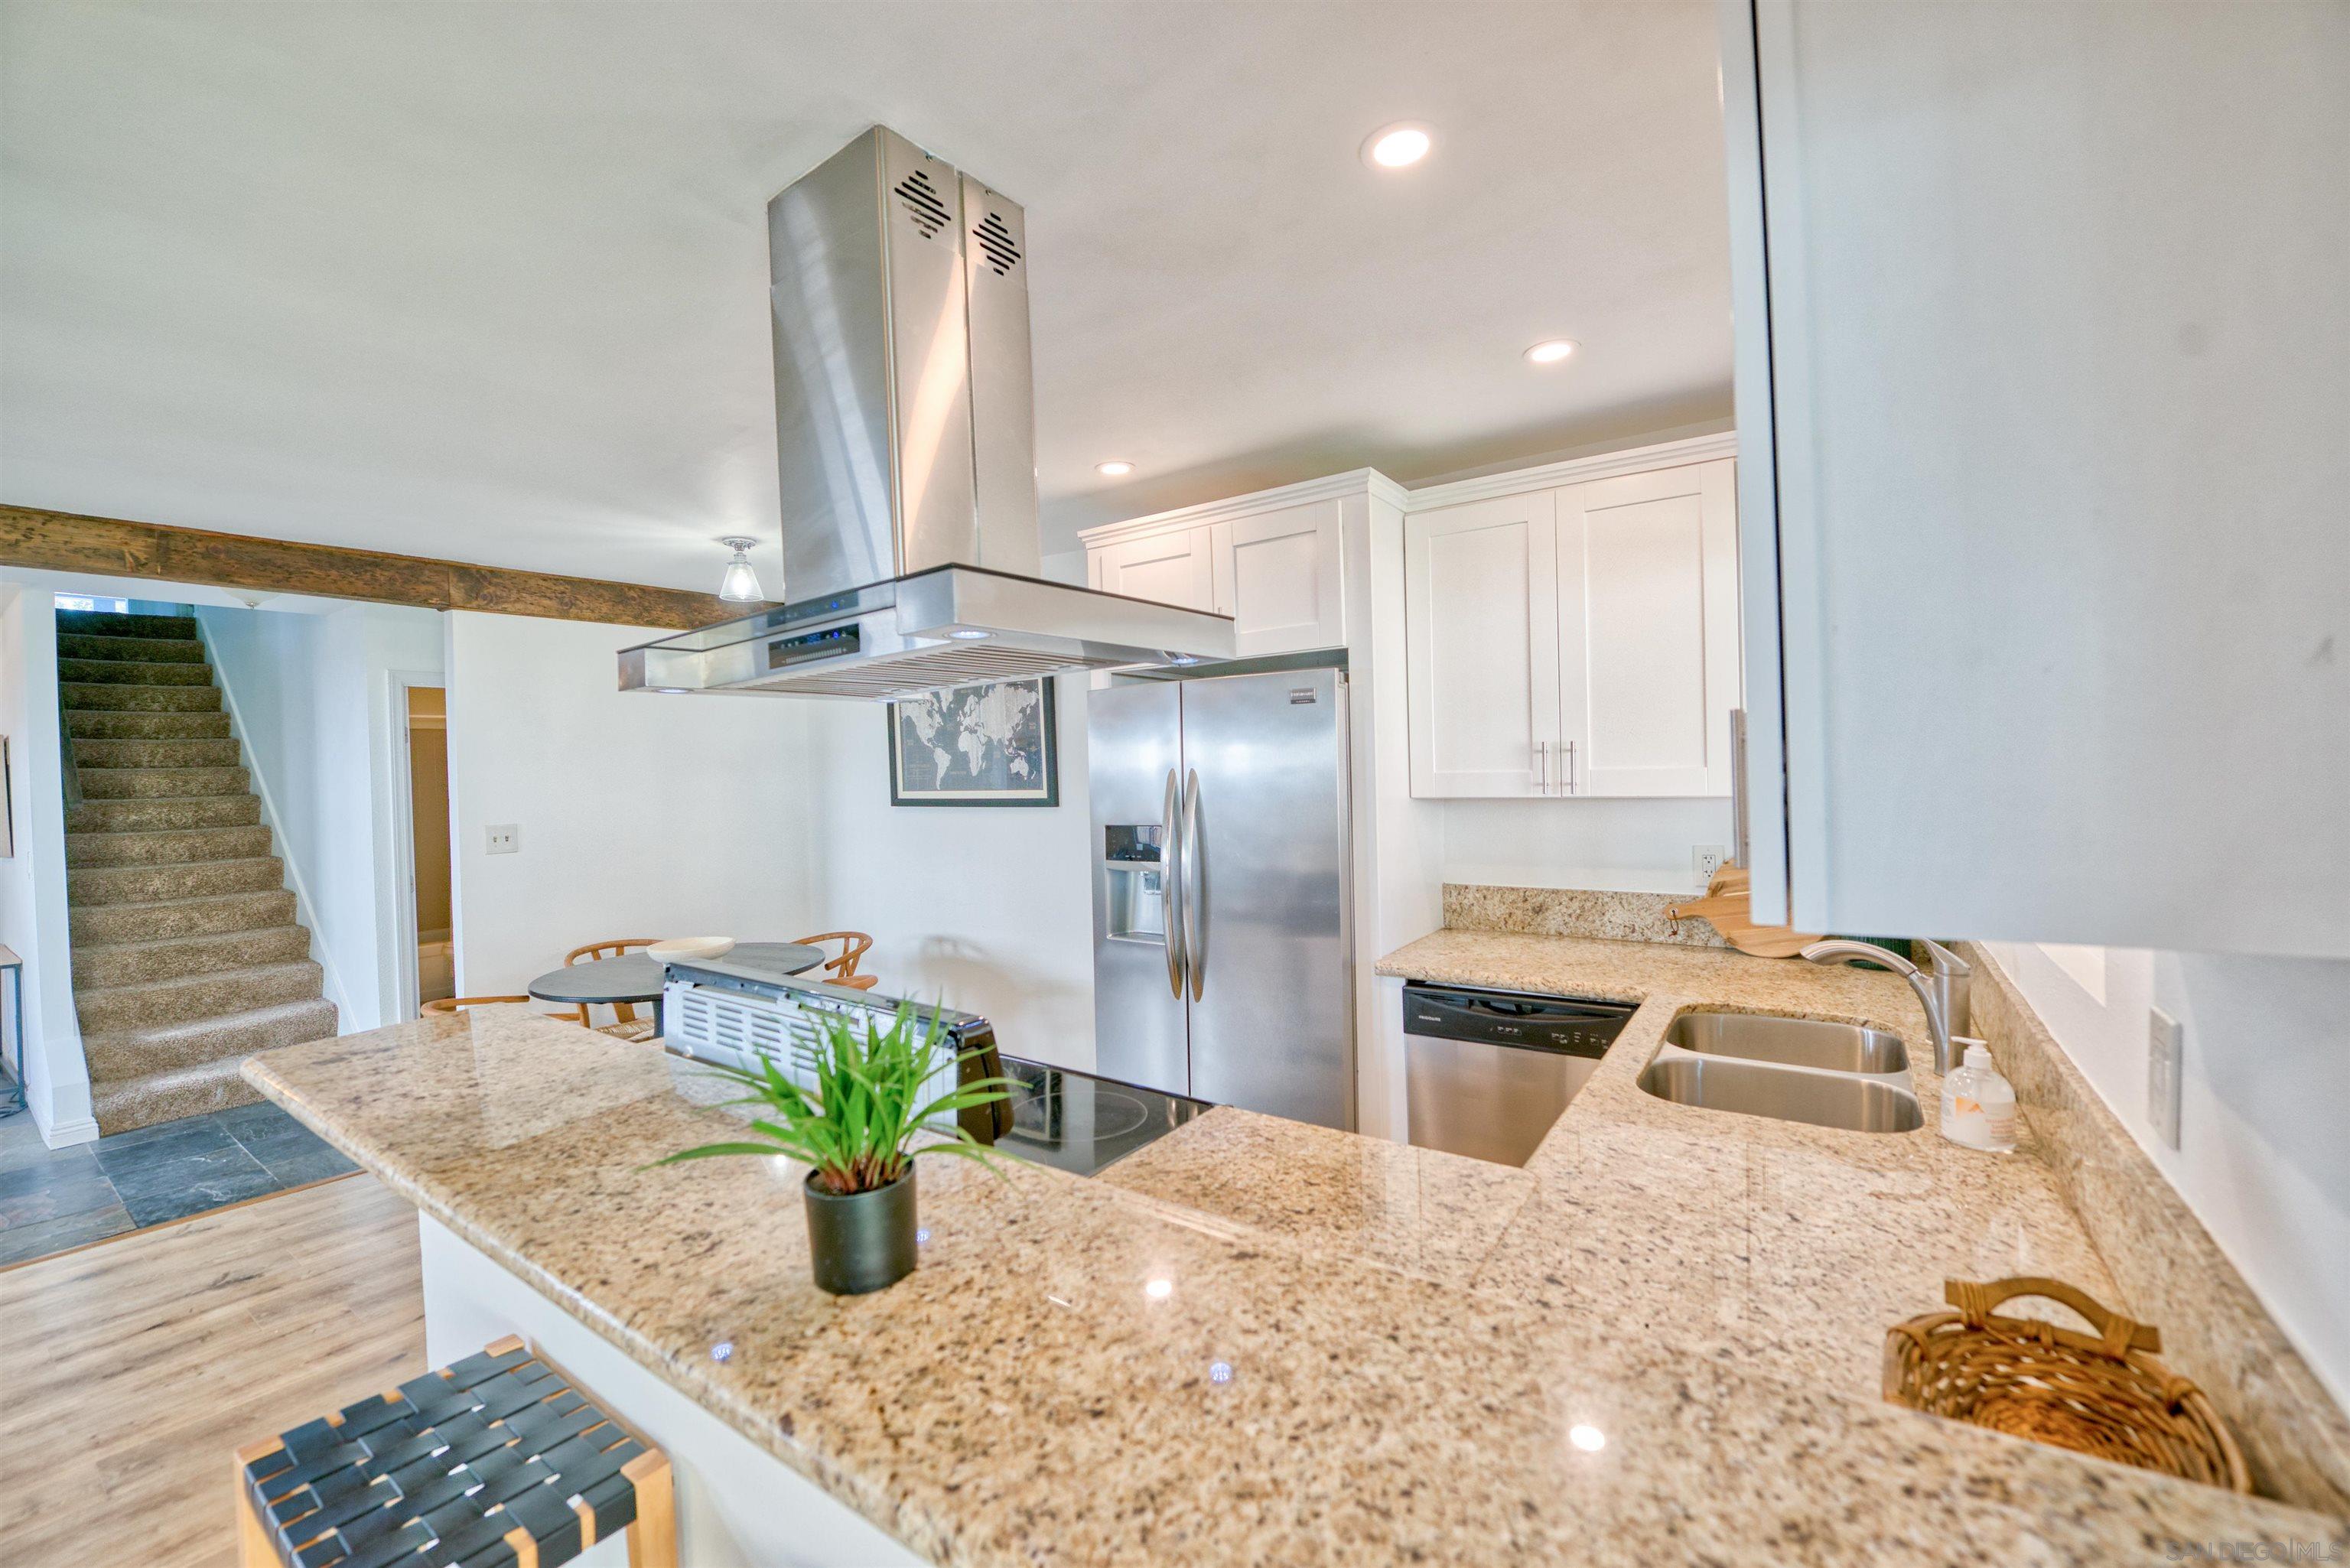 a kitchen with stainless steel appliances kitchen island granite countertop a counter top space cabinets and wooden floor